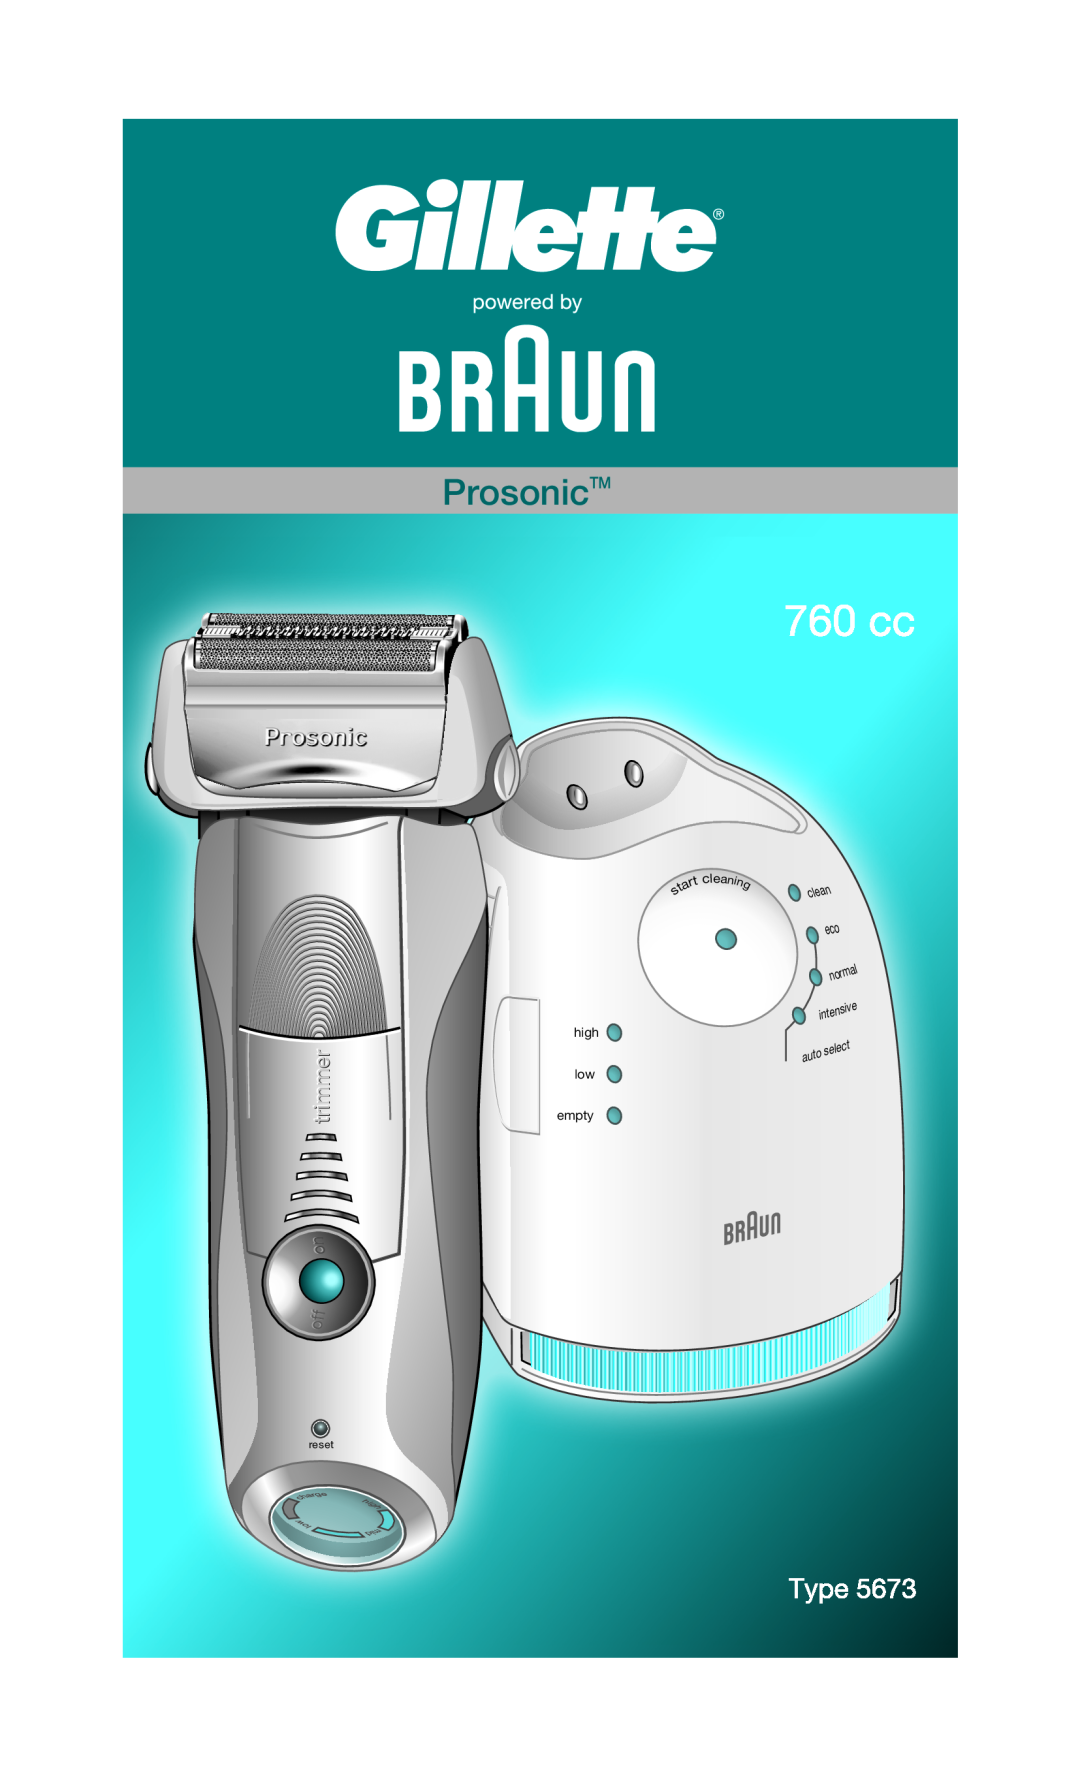 Braun shaver manual ProsonicTM, trimmer, on off, cle a, high low empty, clean, select, auto, reset, normal, intensive 